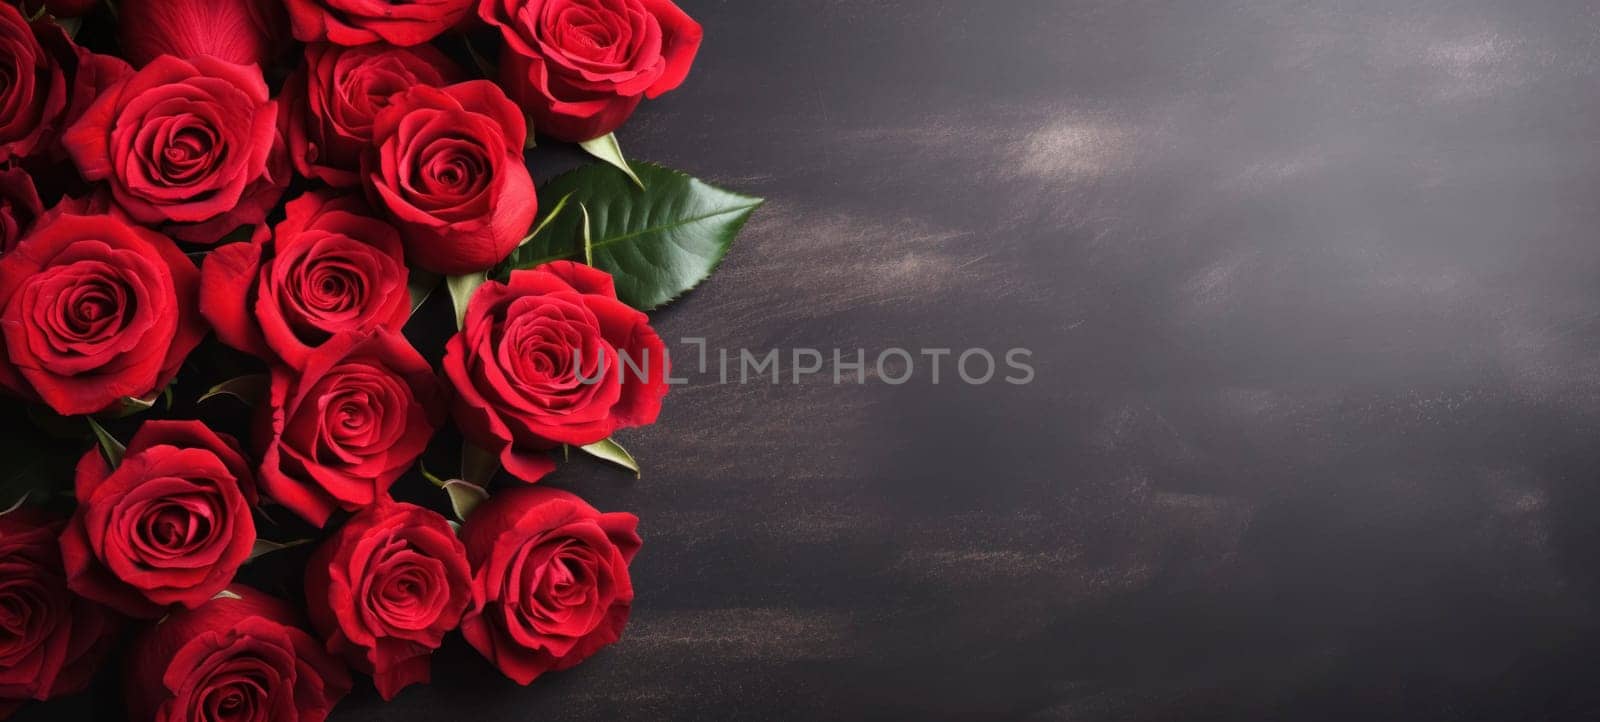 Roses Bouquet and Hearts background. Valentine's Day or wedding background by andreyz